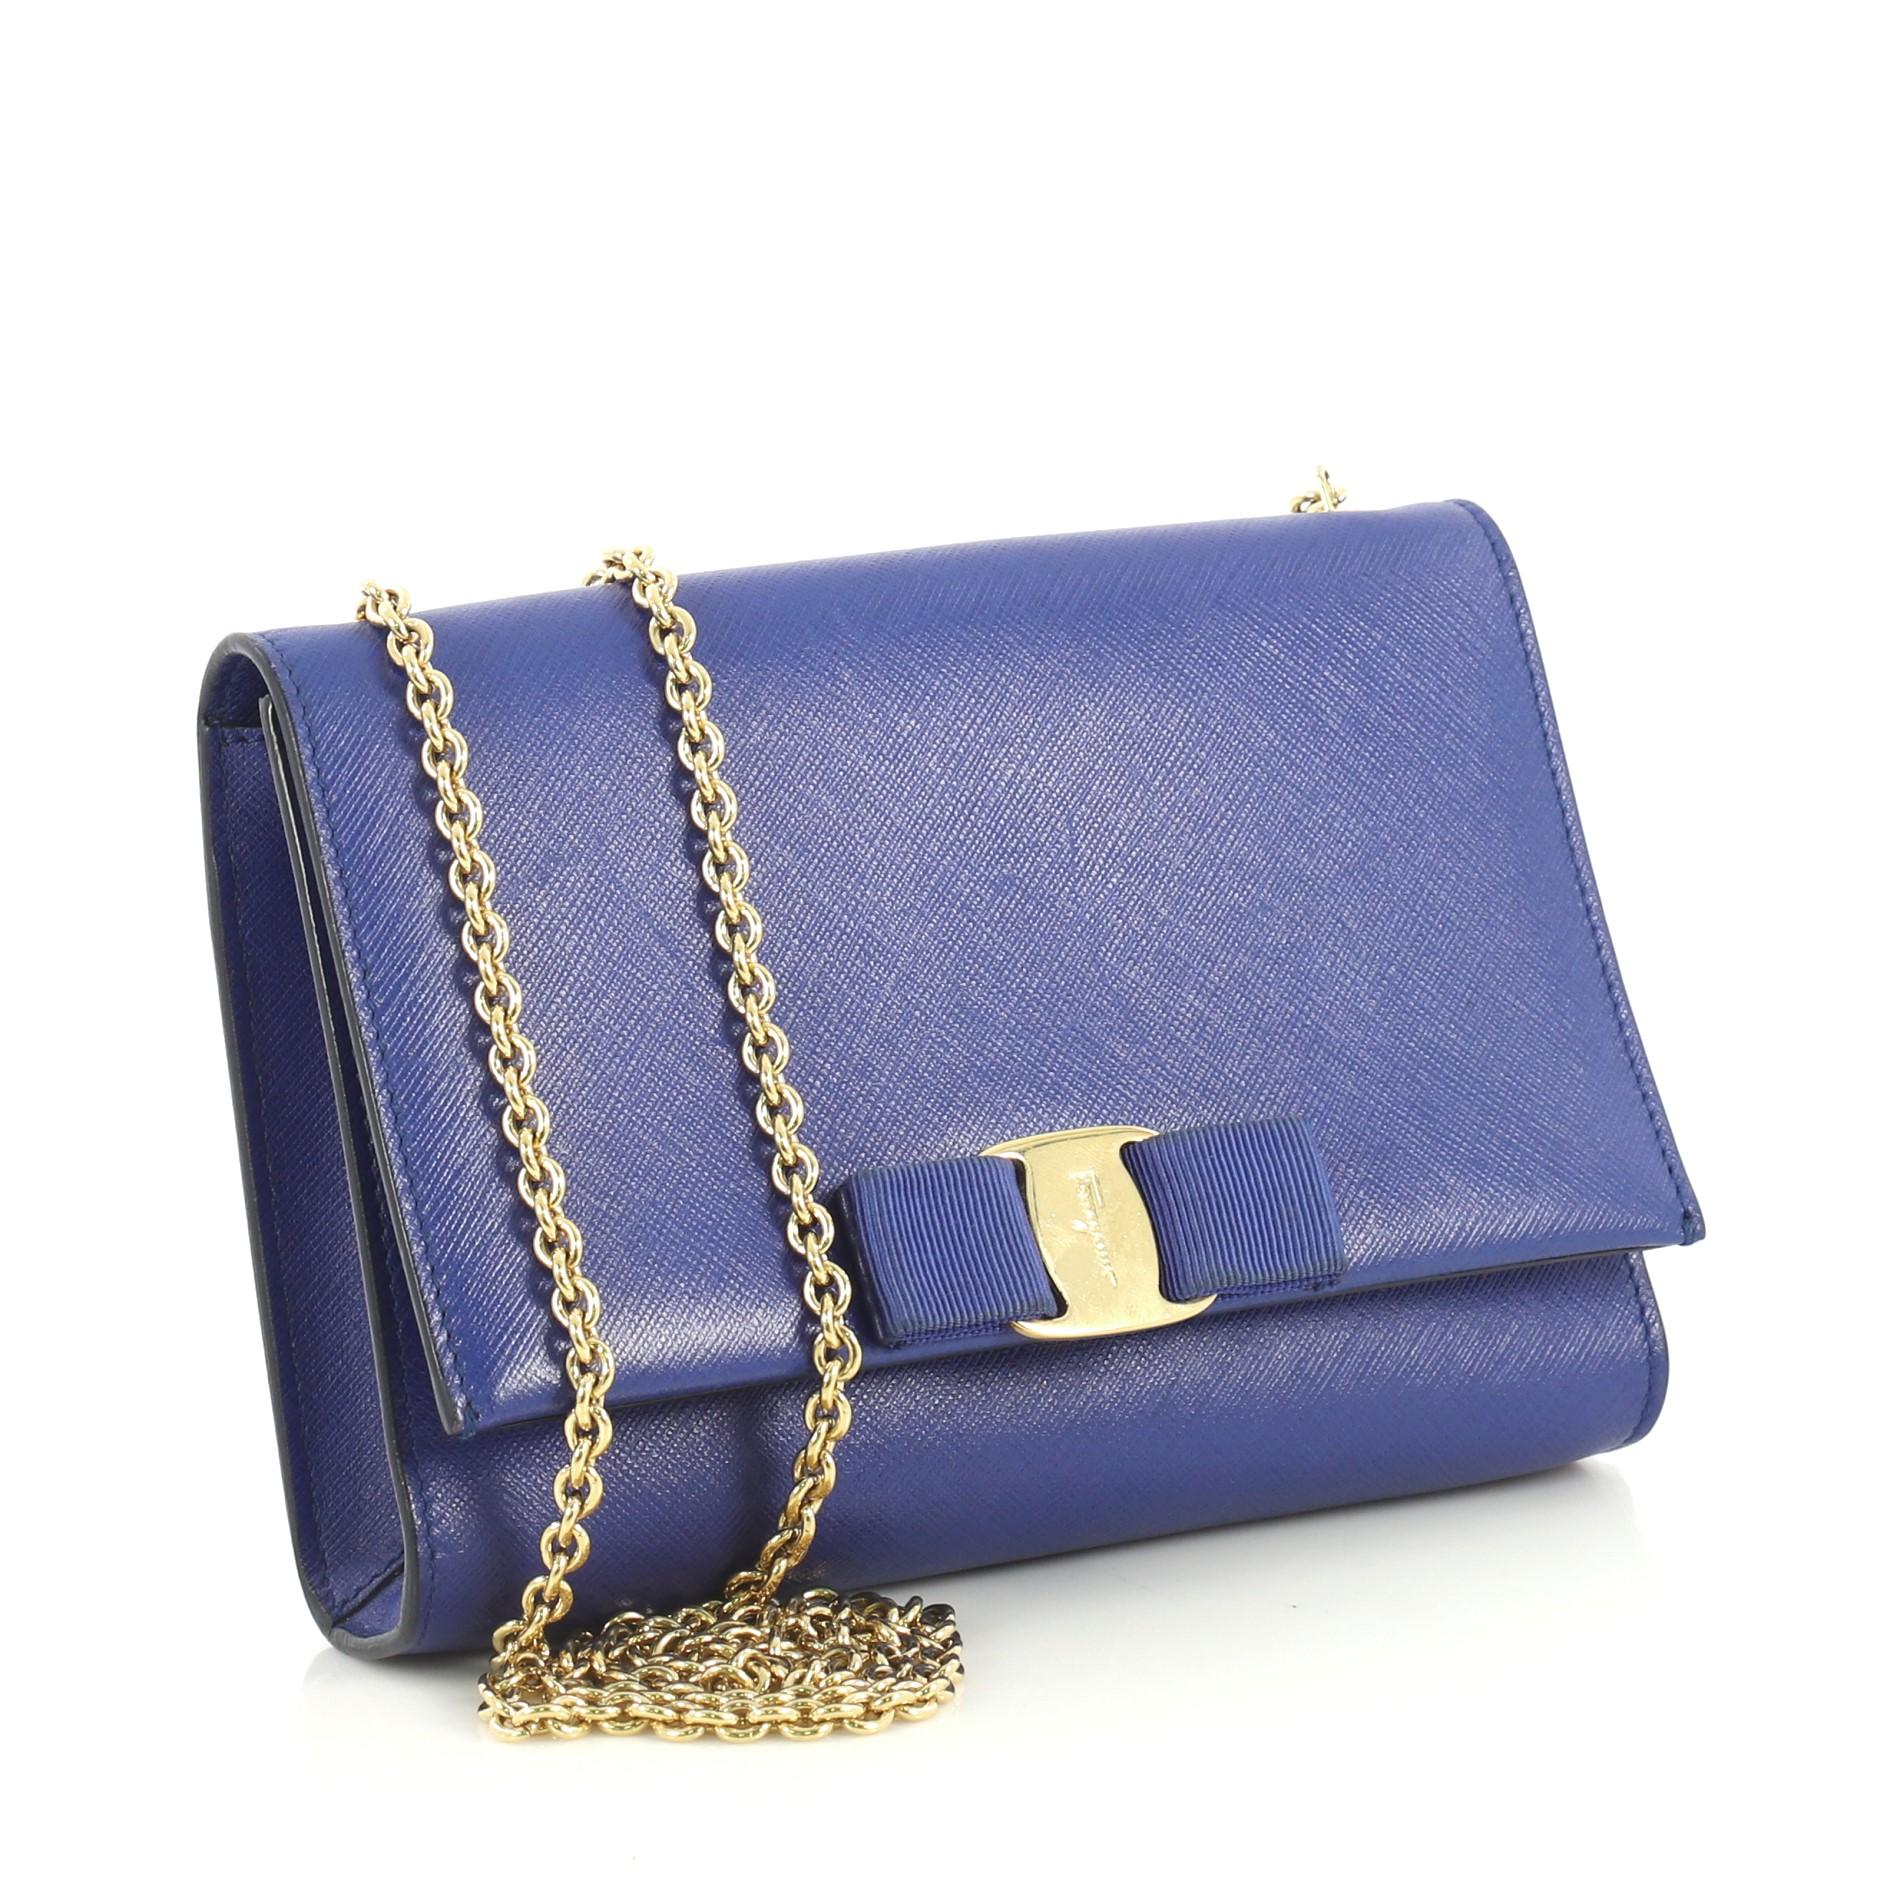 This Salvatore Ferragamo Ginny Crossbody Bag Saffiano Leather Small, crafted from blue saffiano leather, features chain link strap, Vara bow design with Ferragamo logo plate, and gold-tone hardware. Its hidden magnetic snap closure opens to a blue